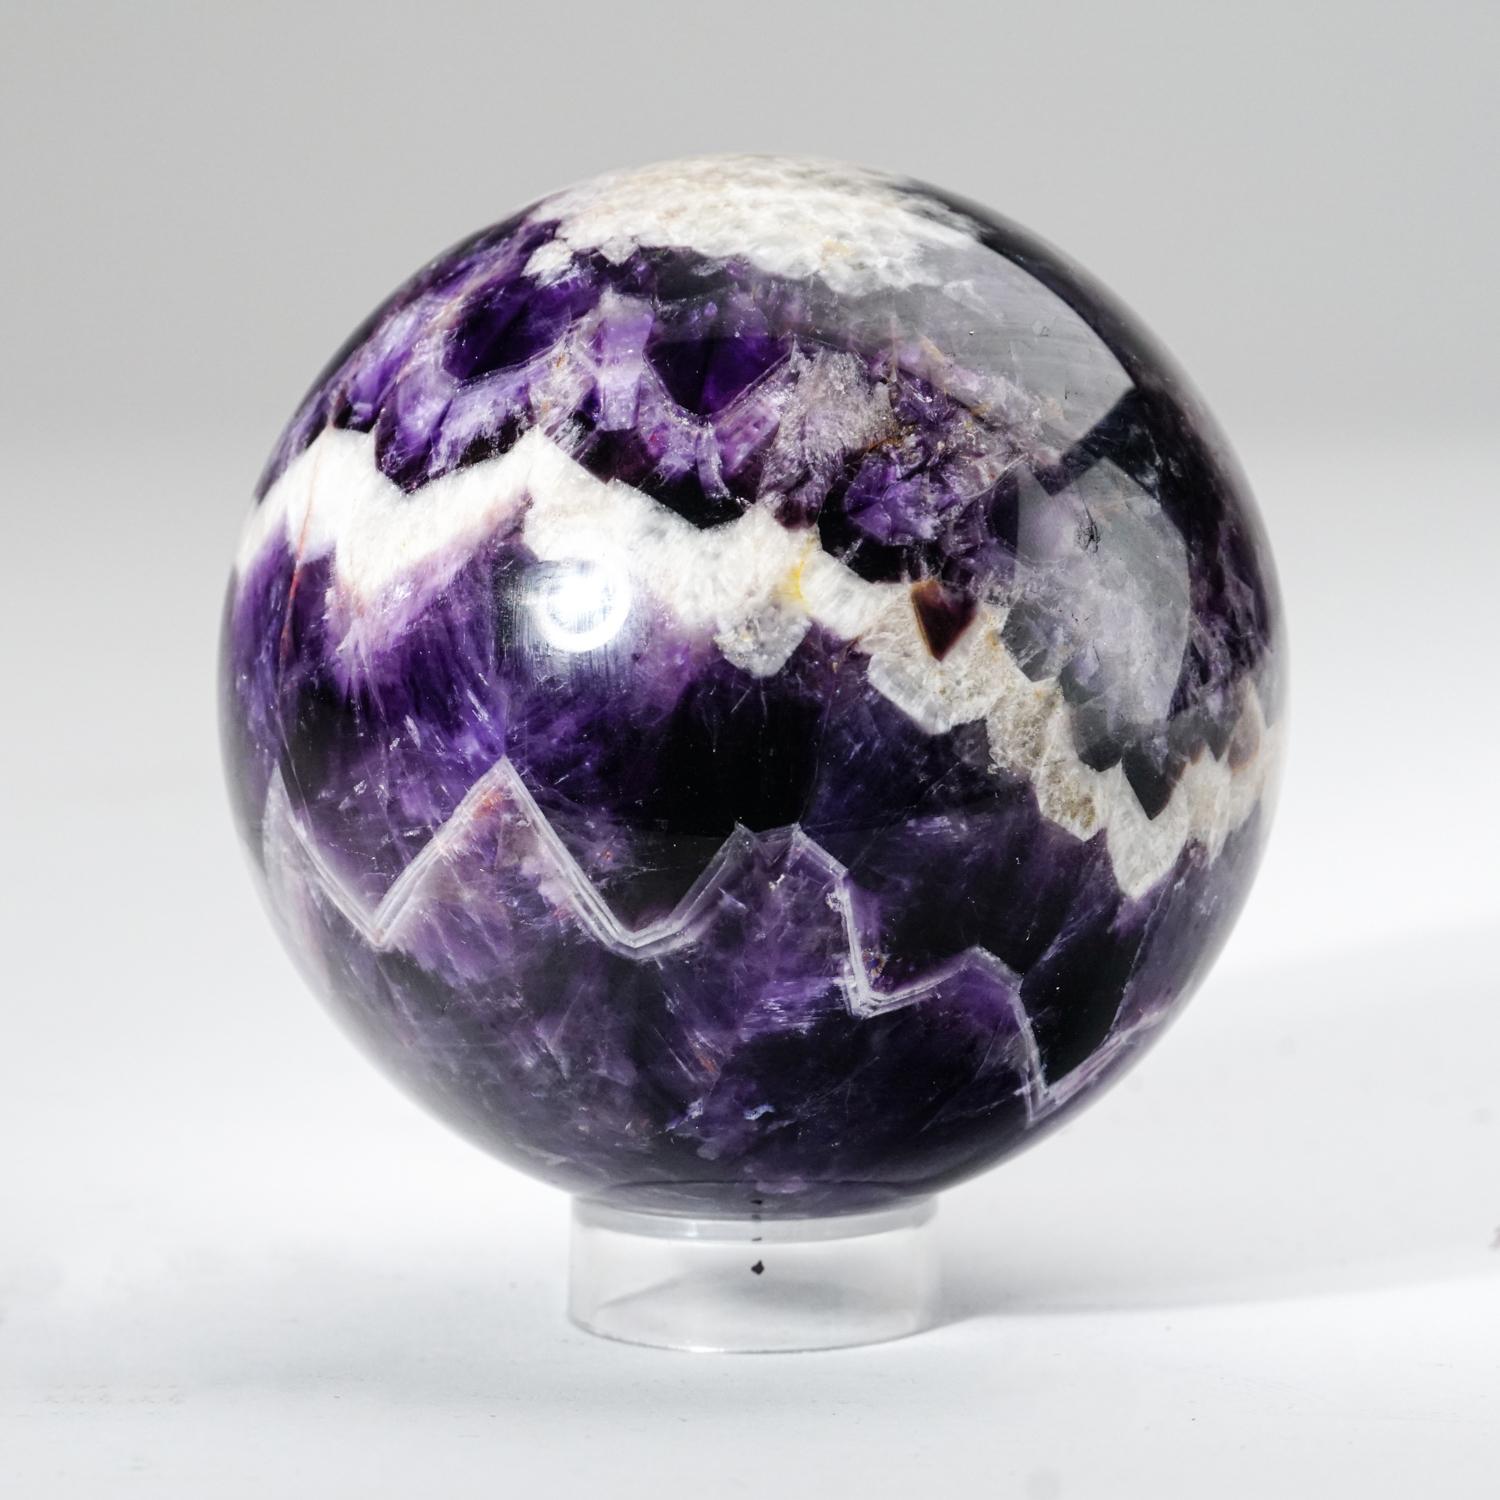 Contemporary Polished Chevron Amethyst Sphere from Brazil (3.5